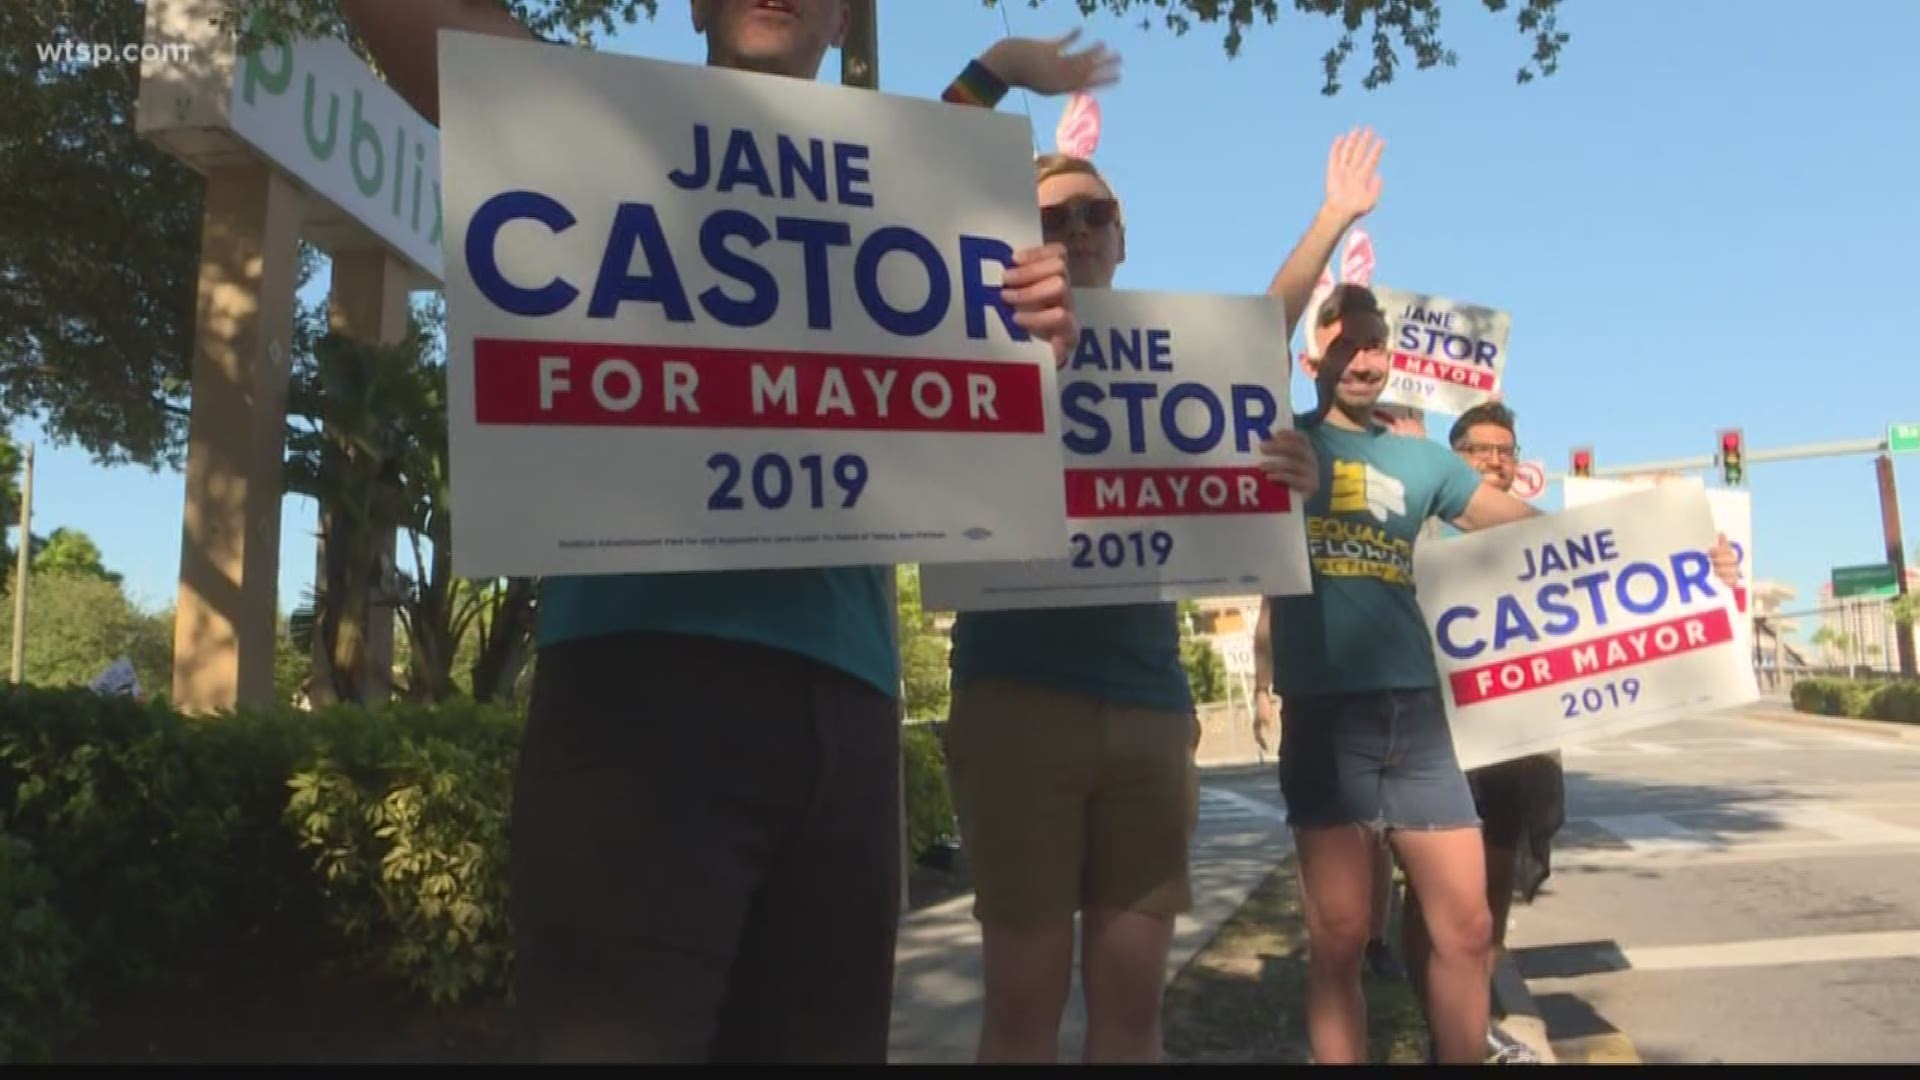 Volunteers are trying to create enthusiasm to get voters to the polls on Tuesday.